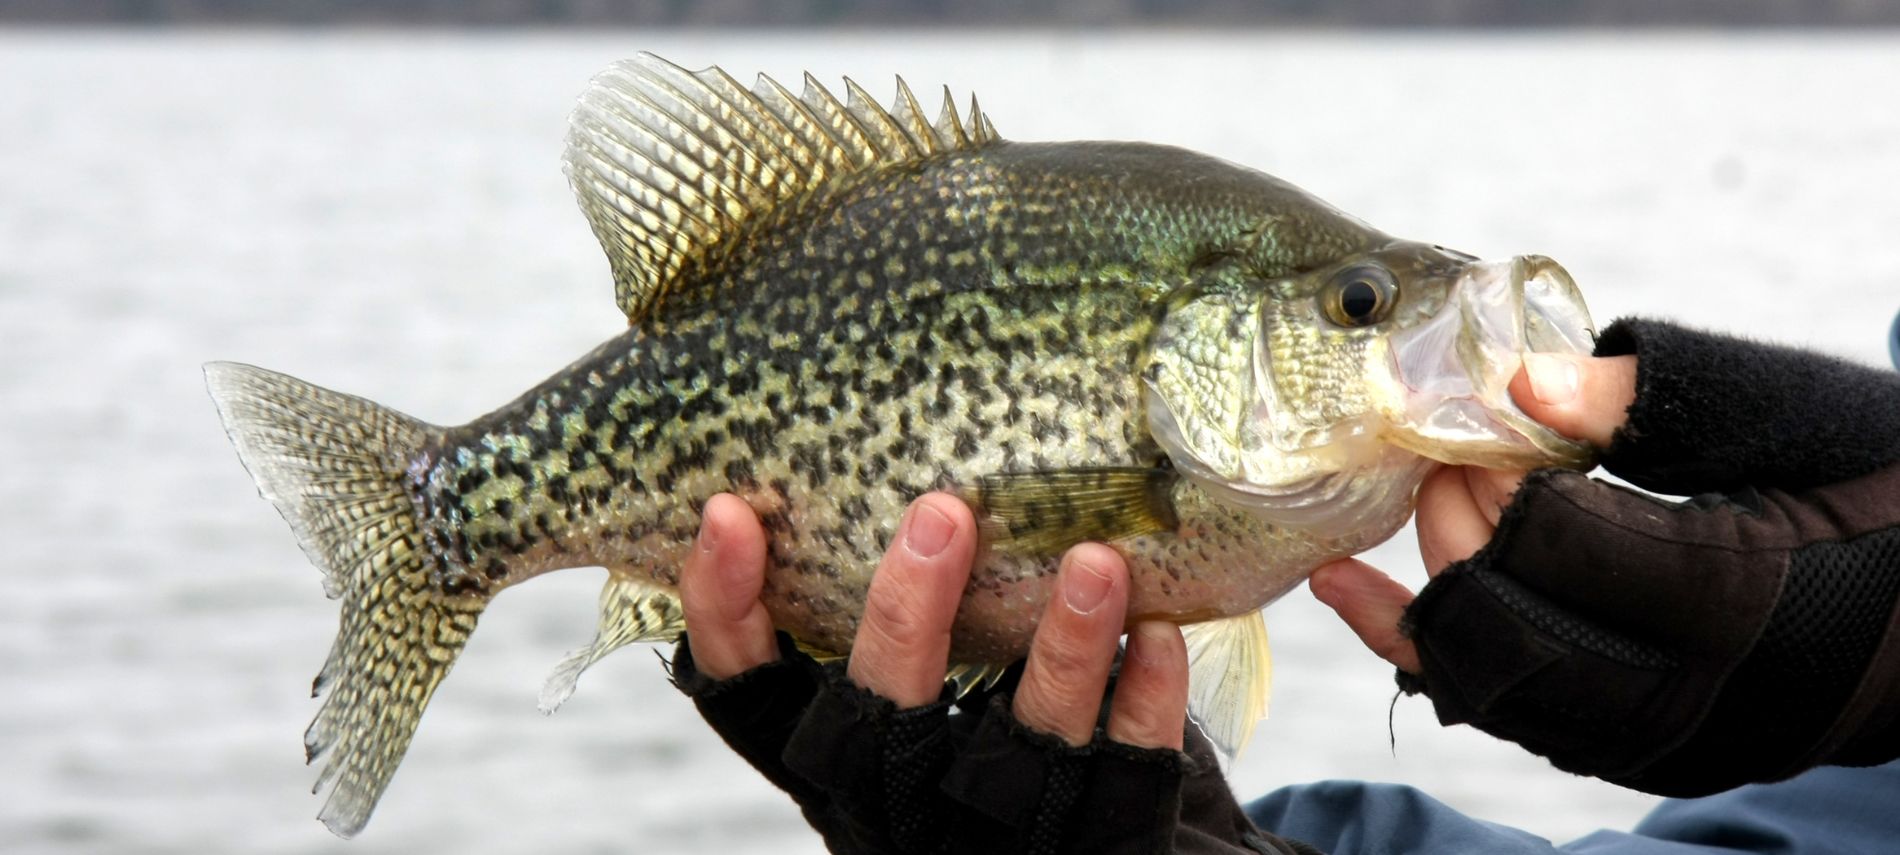 A person with dark gloves holding a large crappie by the water.